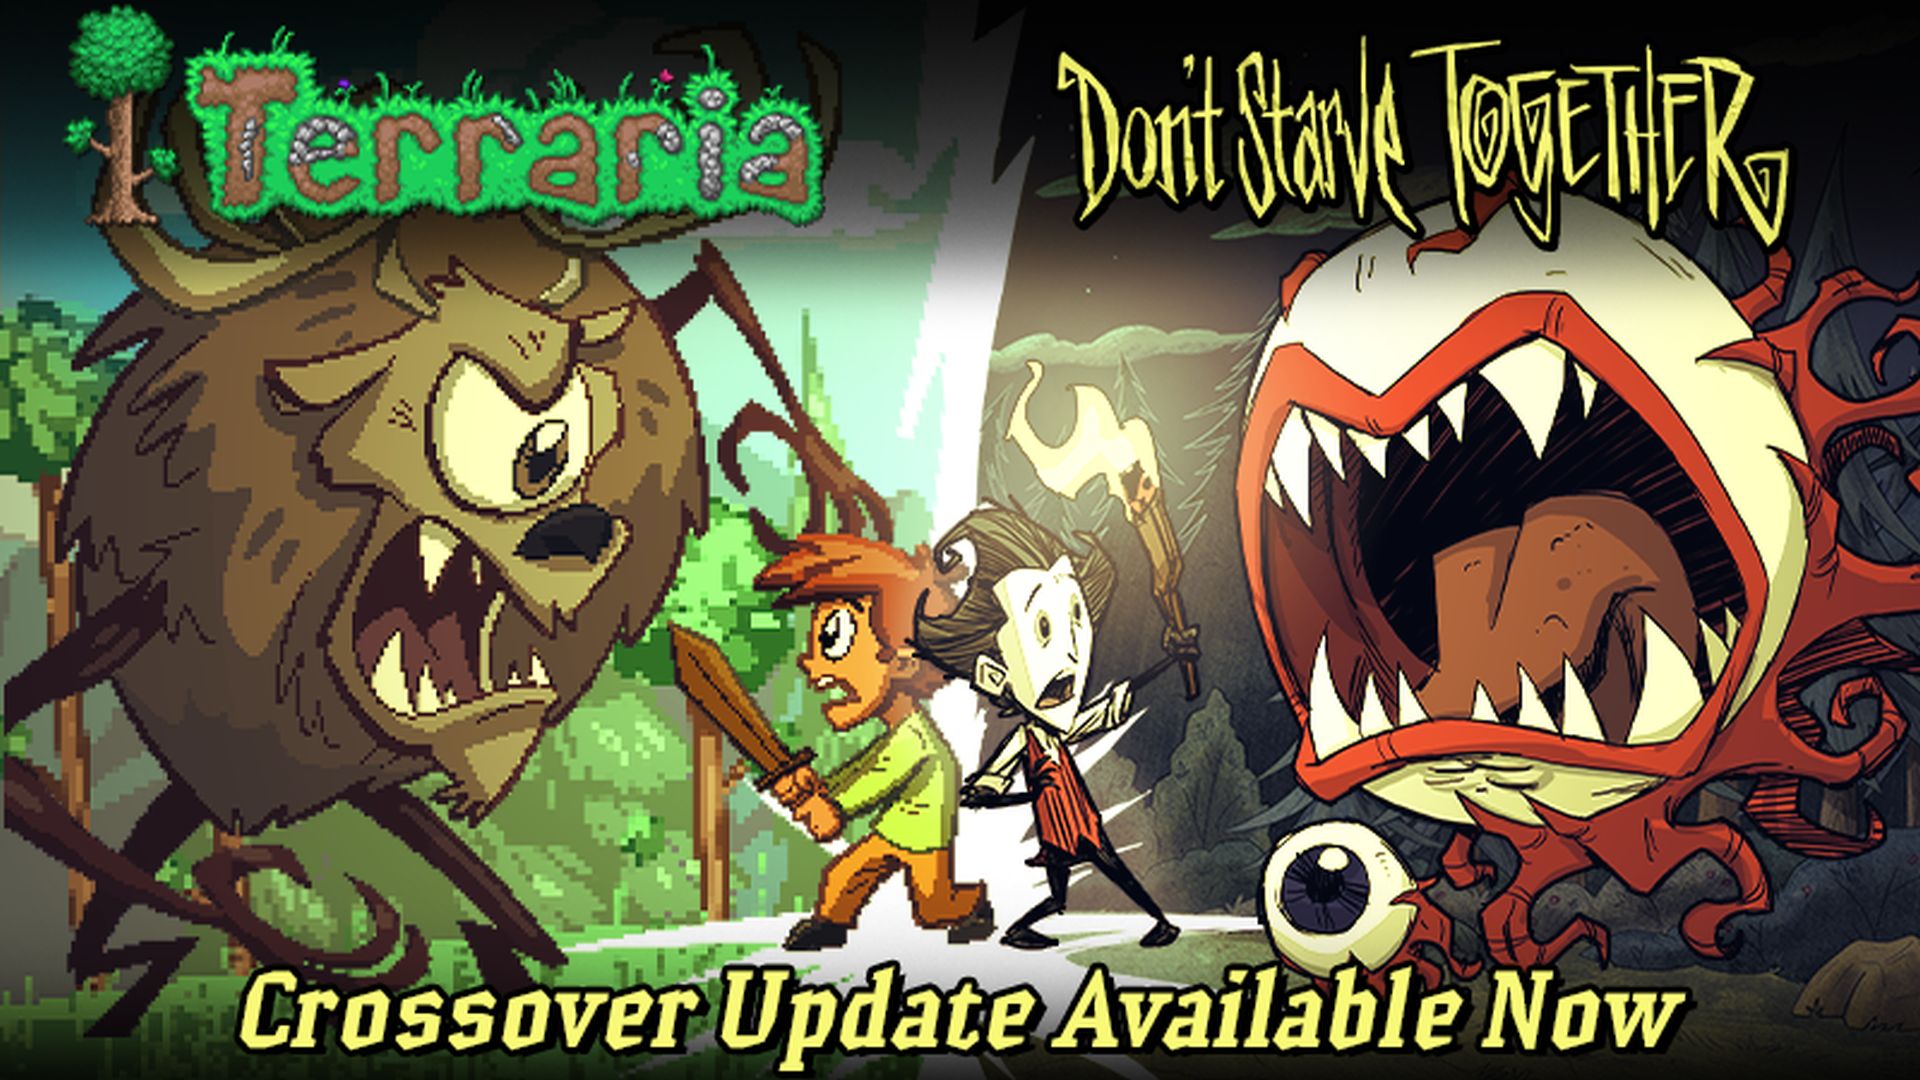 Terraria X Don't Starve Together is Now Available